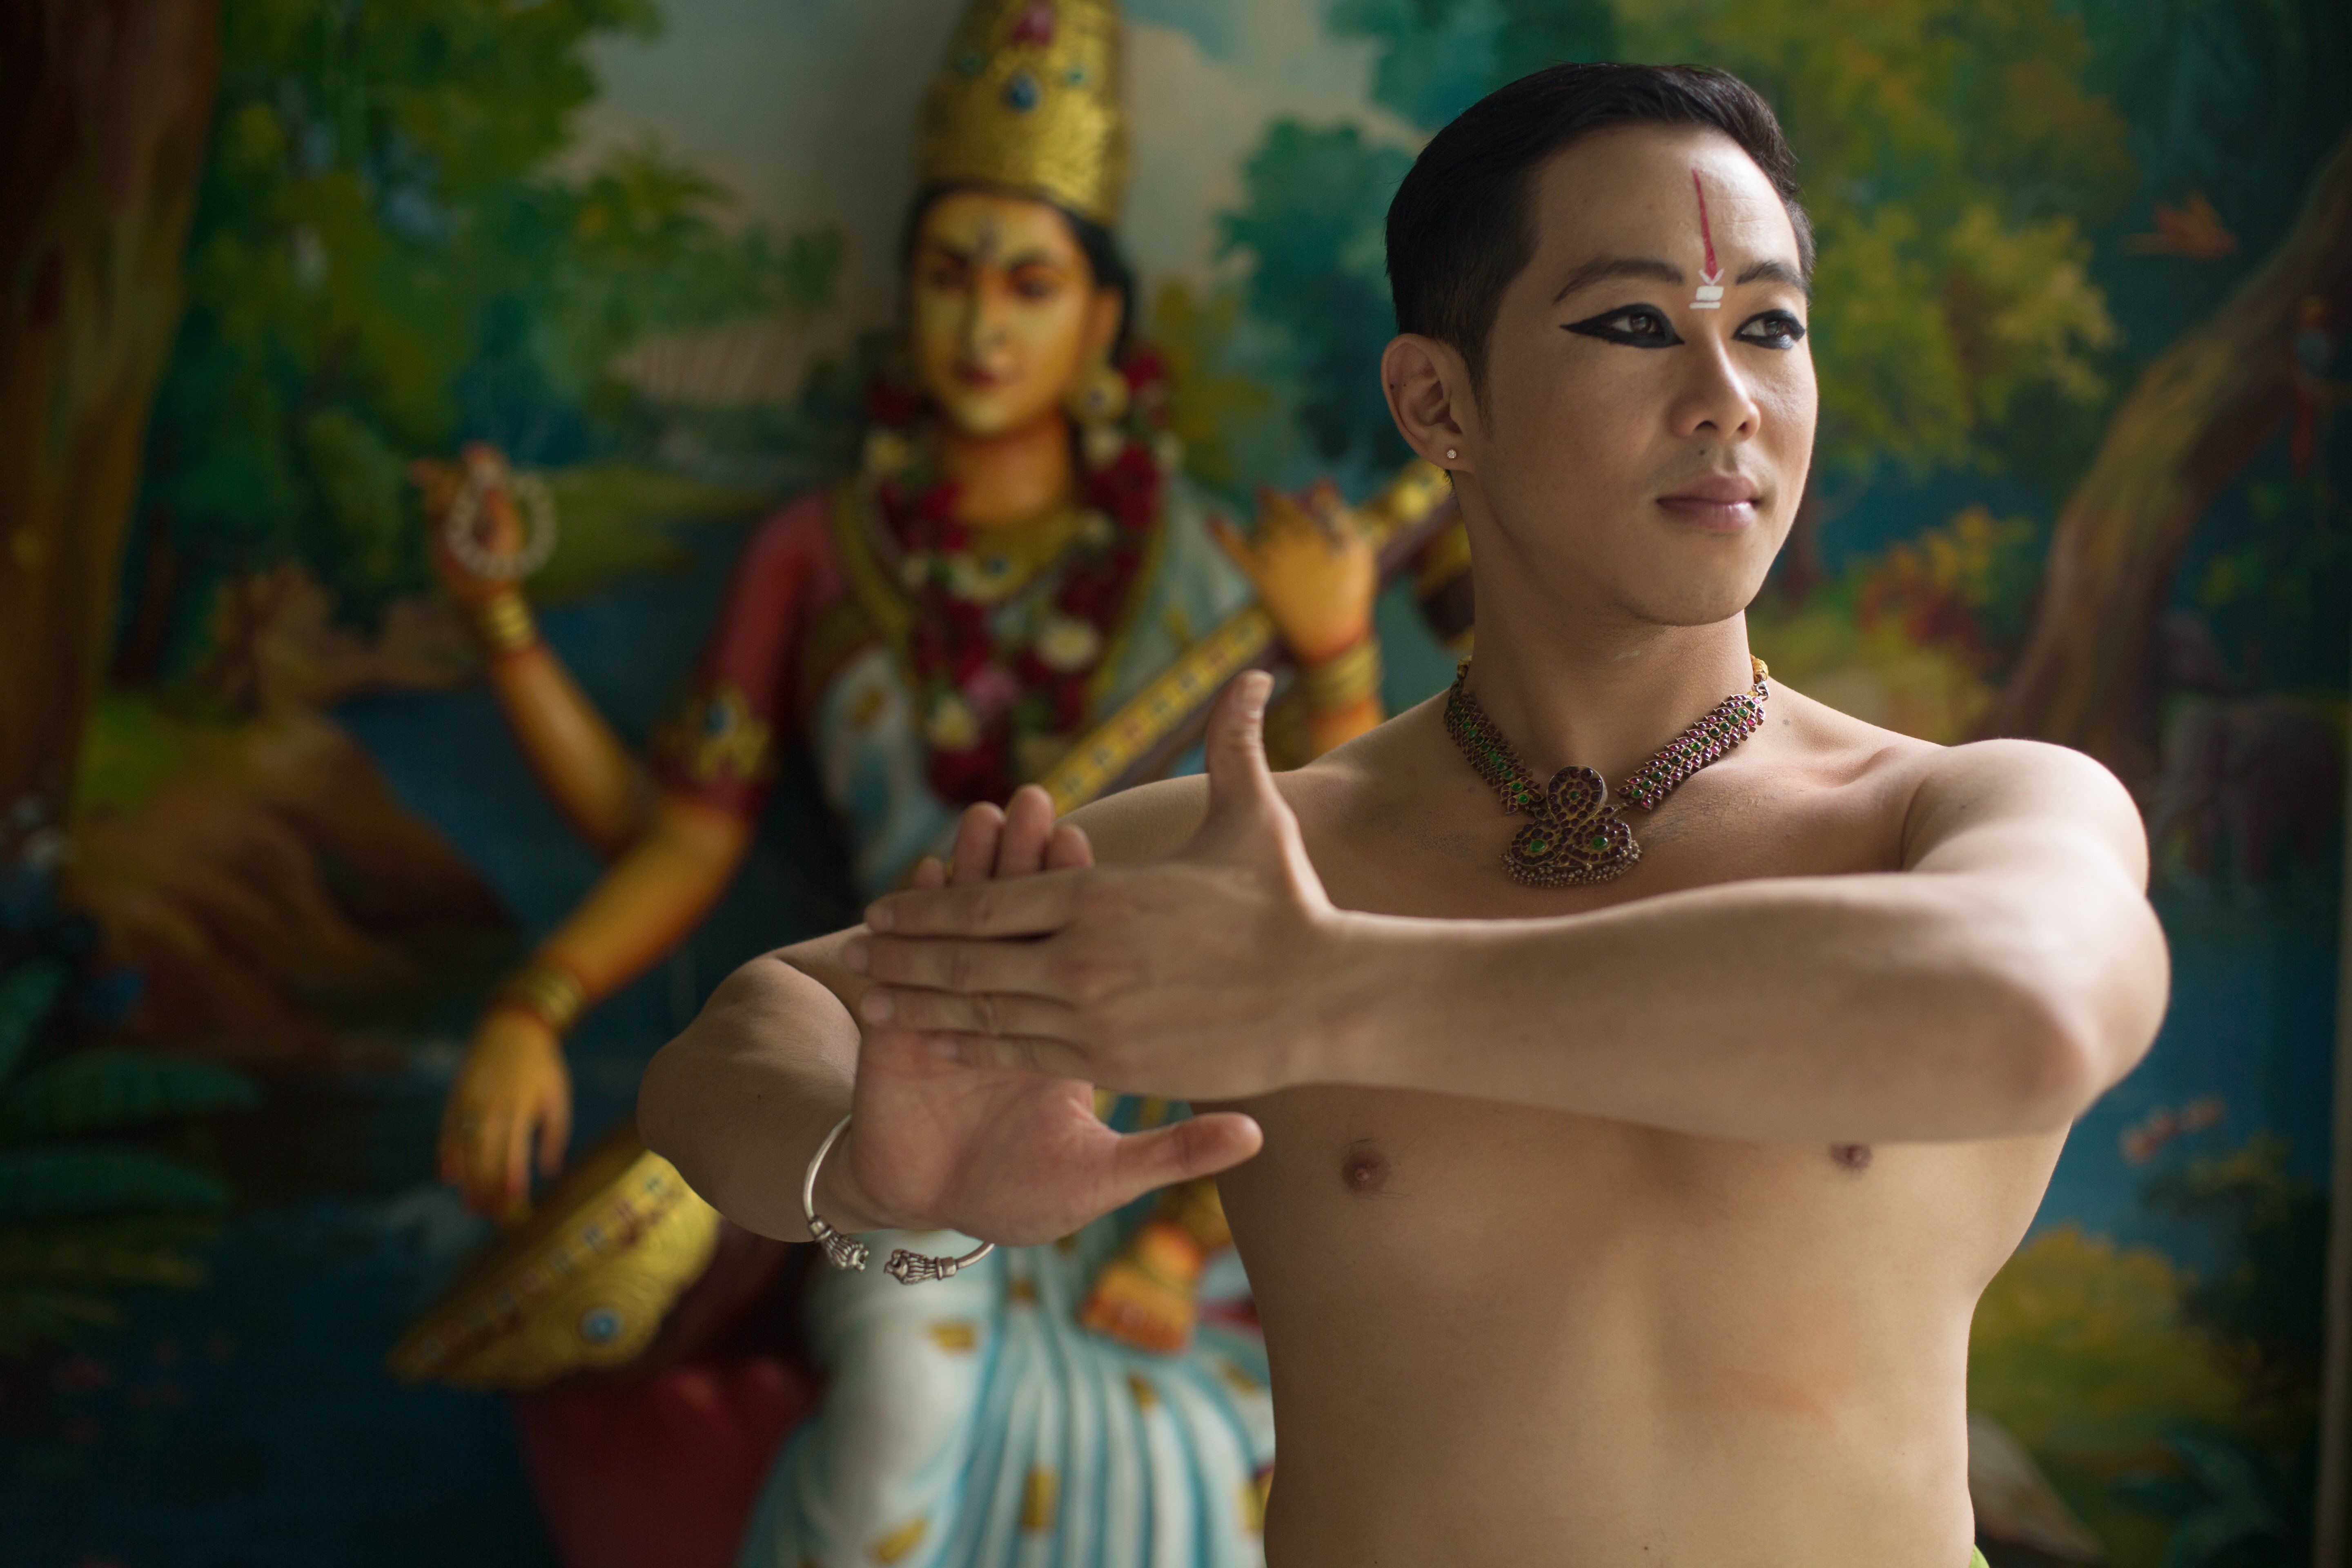 Teacher and performer Charles Ma. Photo: Sumukha [FEATURES 2019]